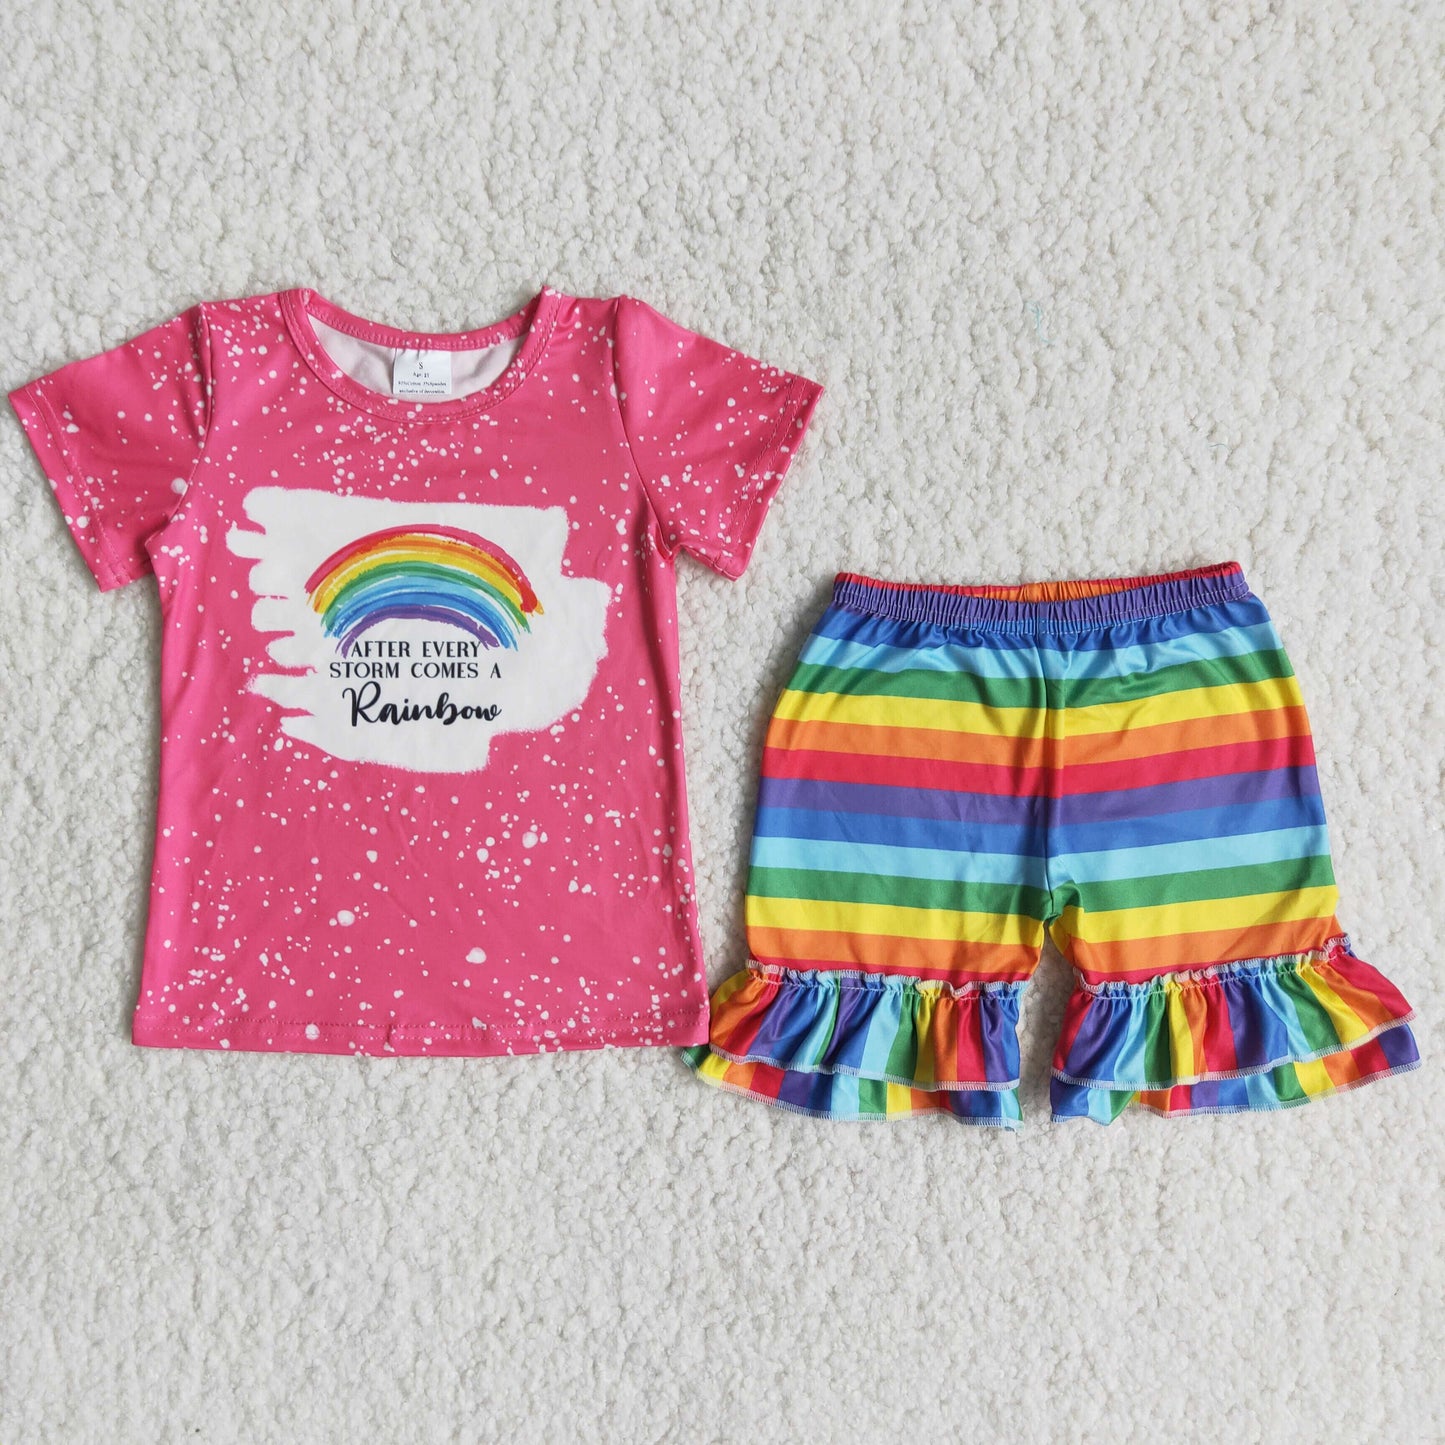 After every storm comes a rainbow baby girls clothing